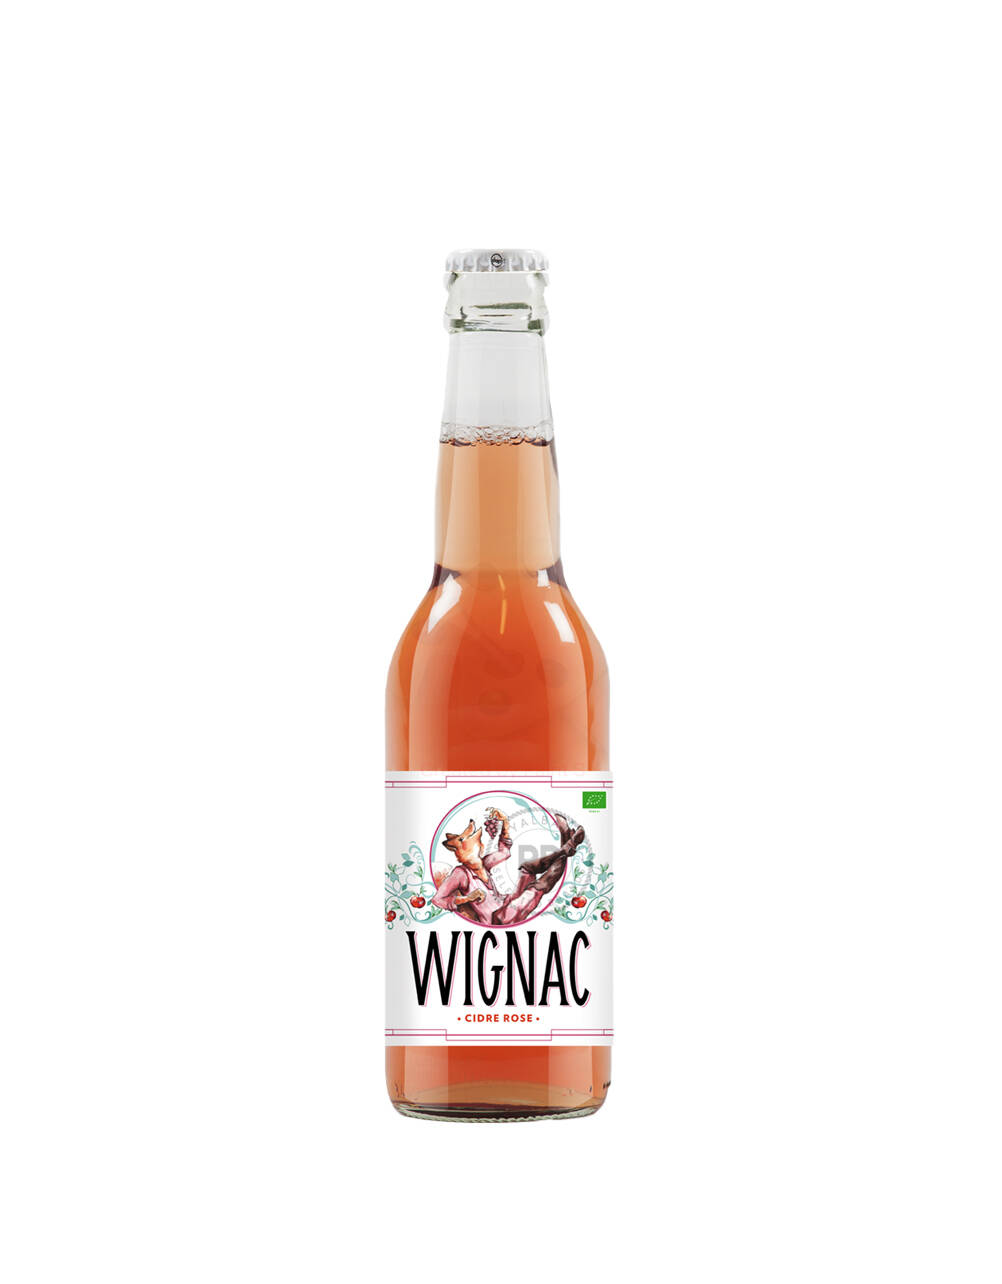 Wignac Le Goupil by French Cider and Spirits 330ml